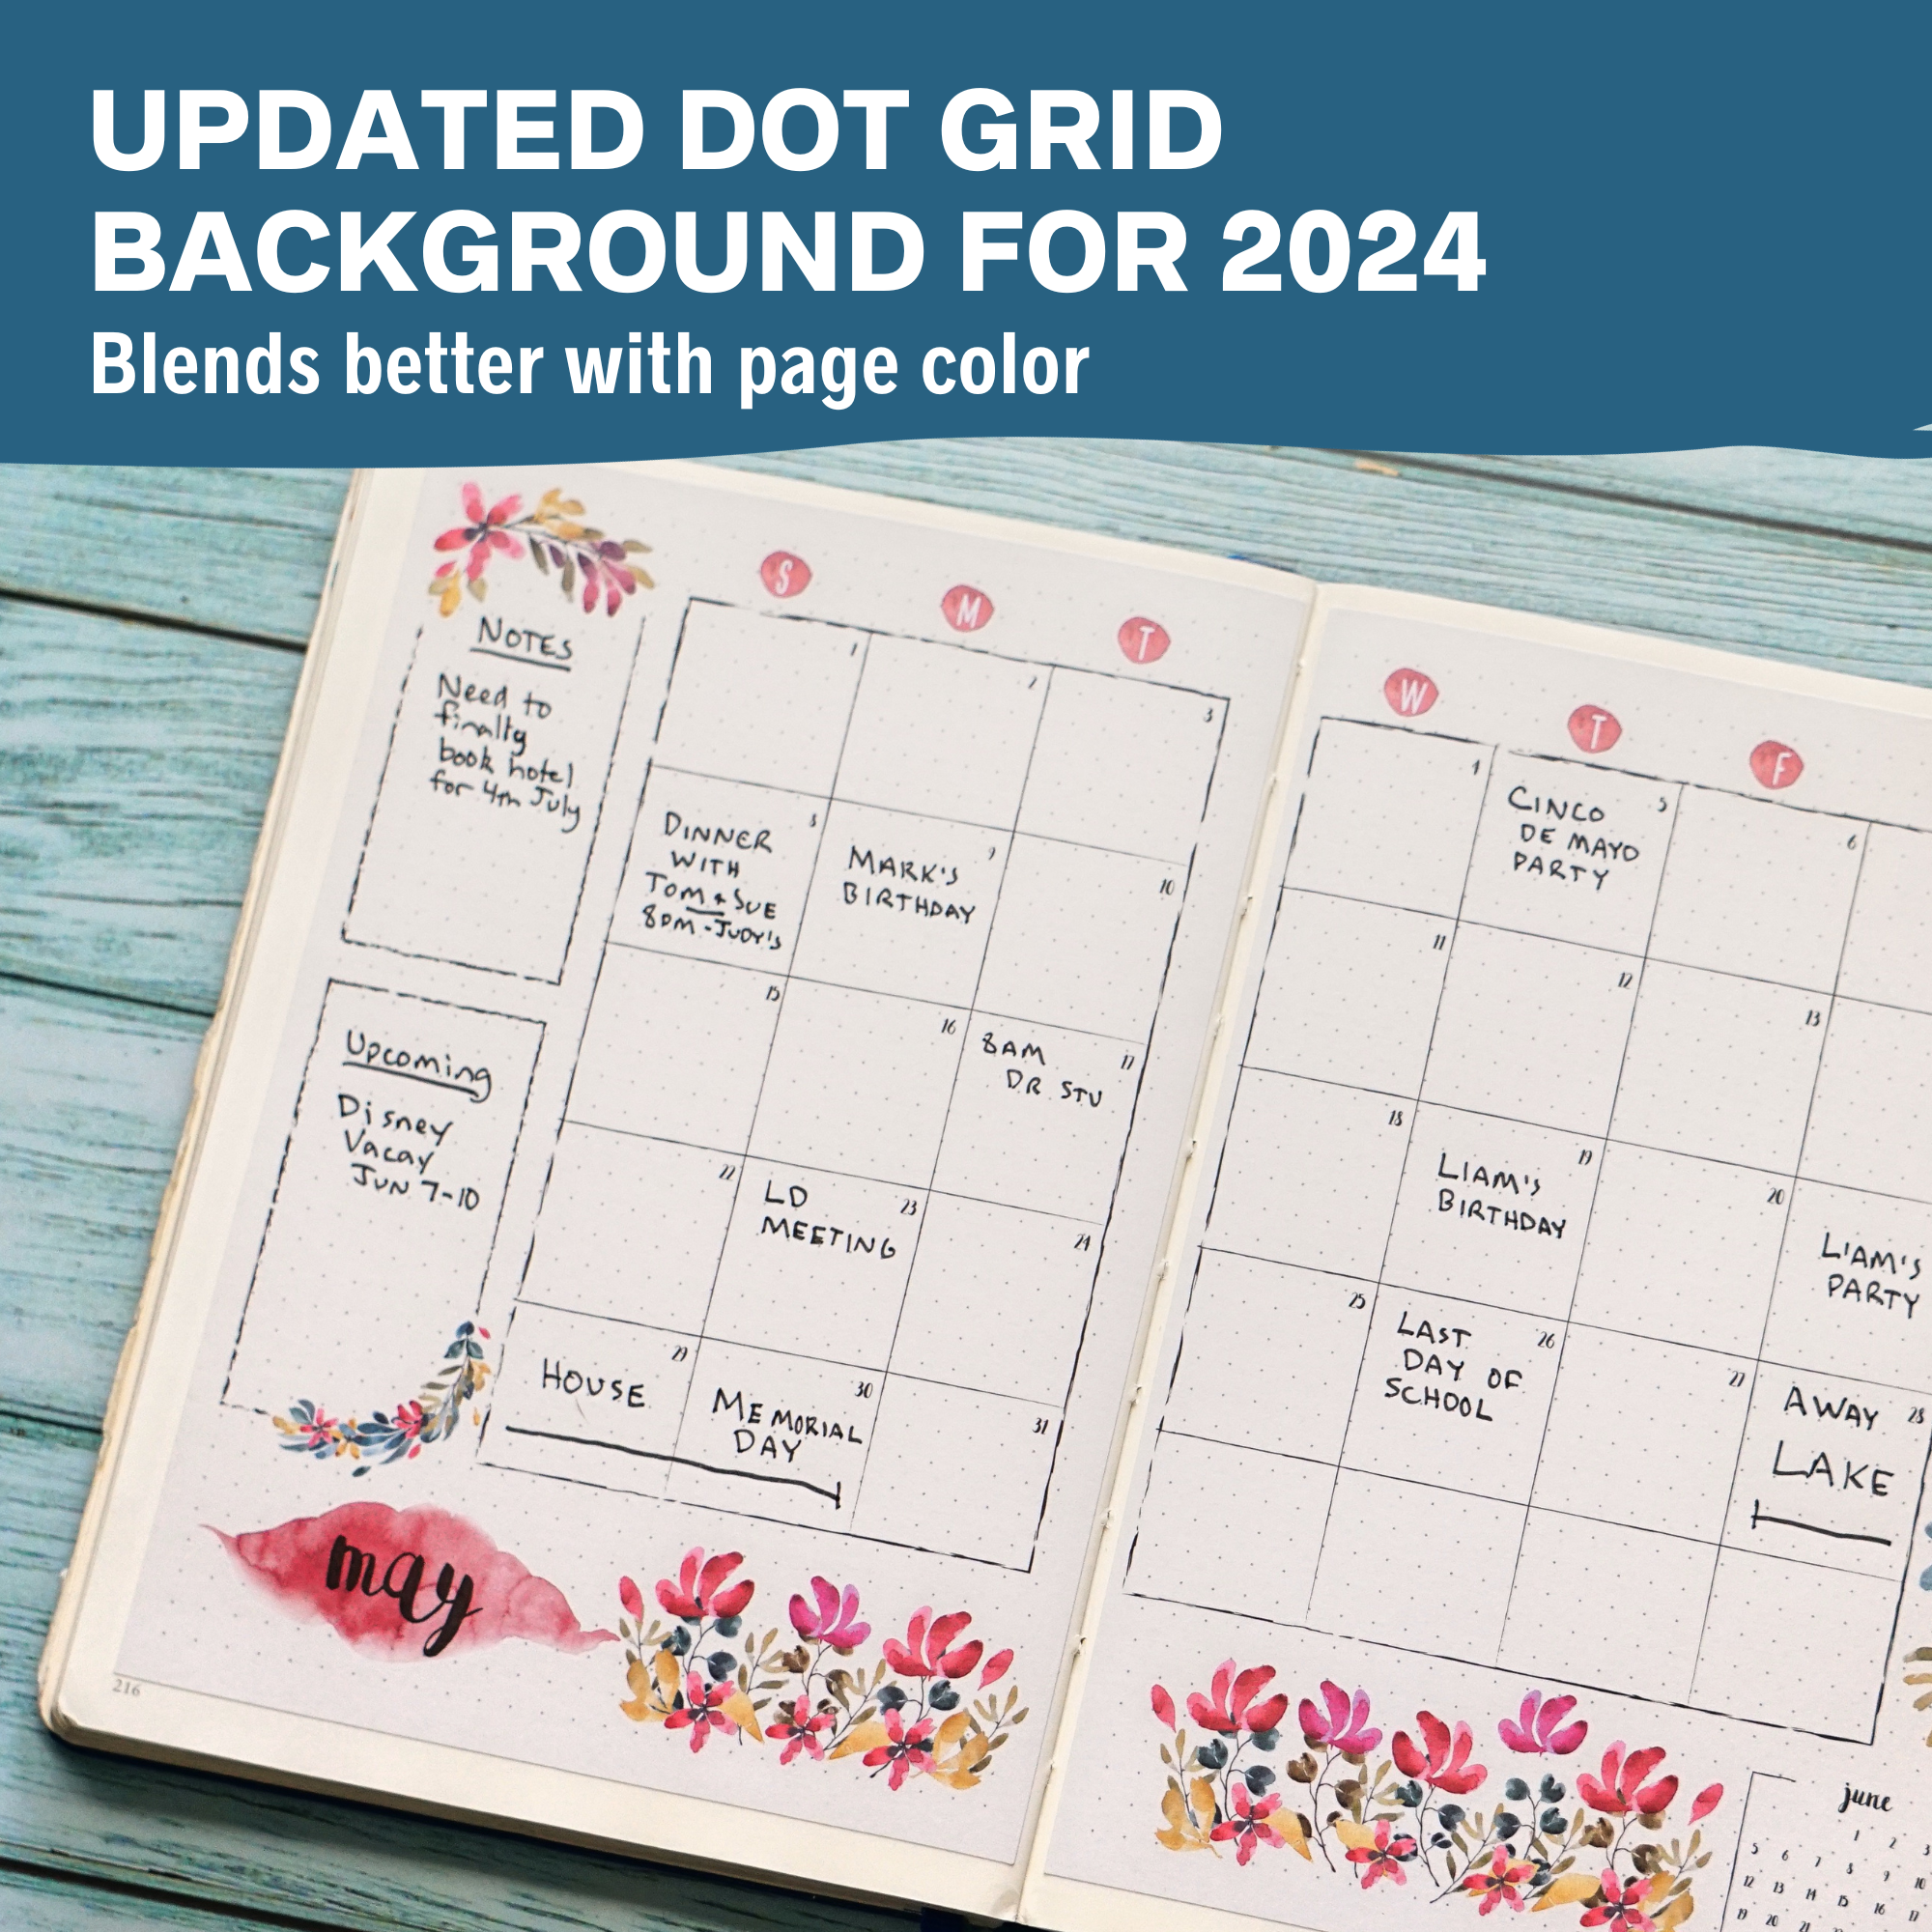  Undated Monthly Calendar Planner Stickers Compatible with A5  Bullet Dot Grid Journals (5.3 x 7.7) - 12-Month Calendars Cute Floral  Illustrations, Flower Journal Supplies, Templates, Agenda Layouts : Office  Products